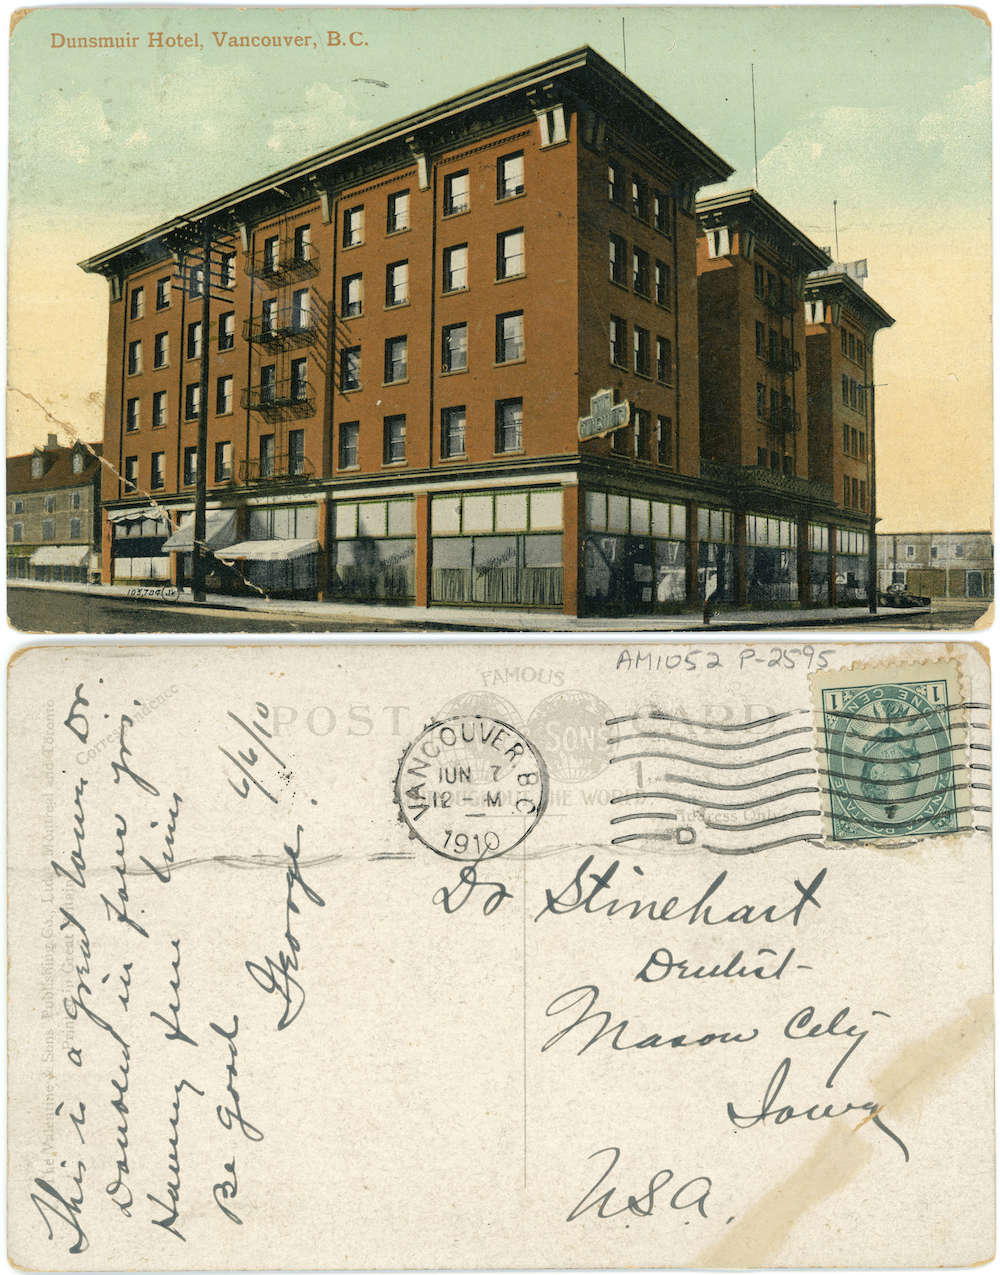 A stacked image shows the front and back of a vintage colour postcard. The front shows the Dunsmuir Hotel. The back has a short message and an address for someone in Iowa.